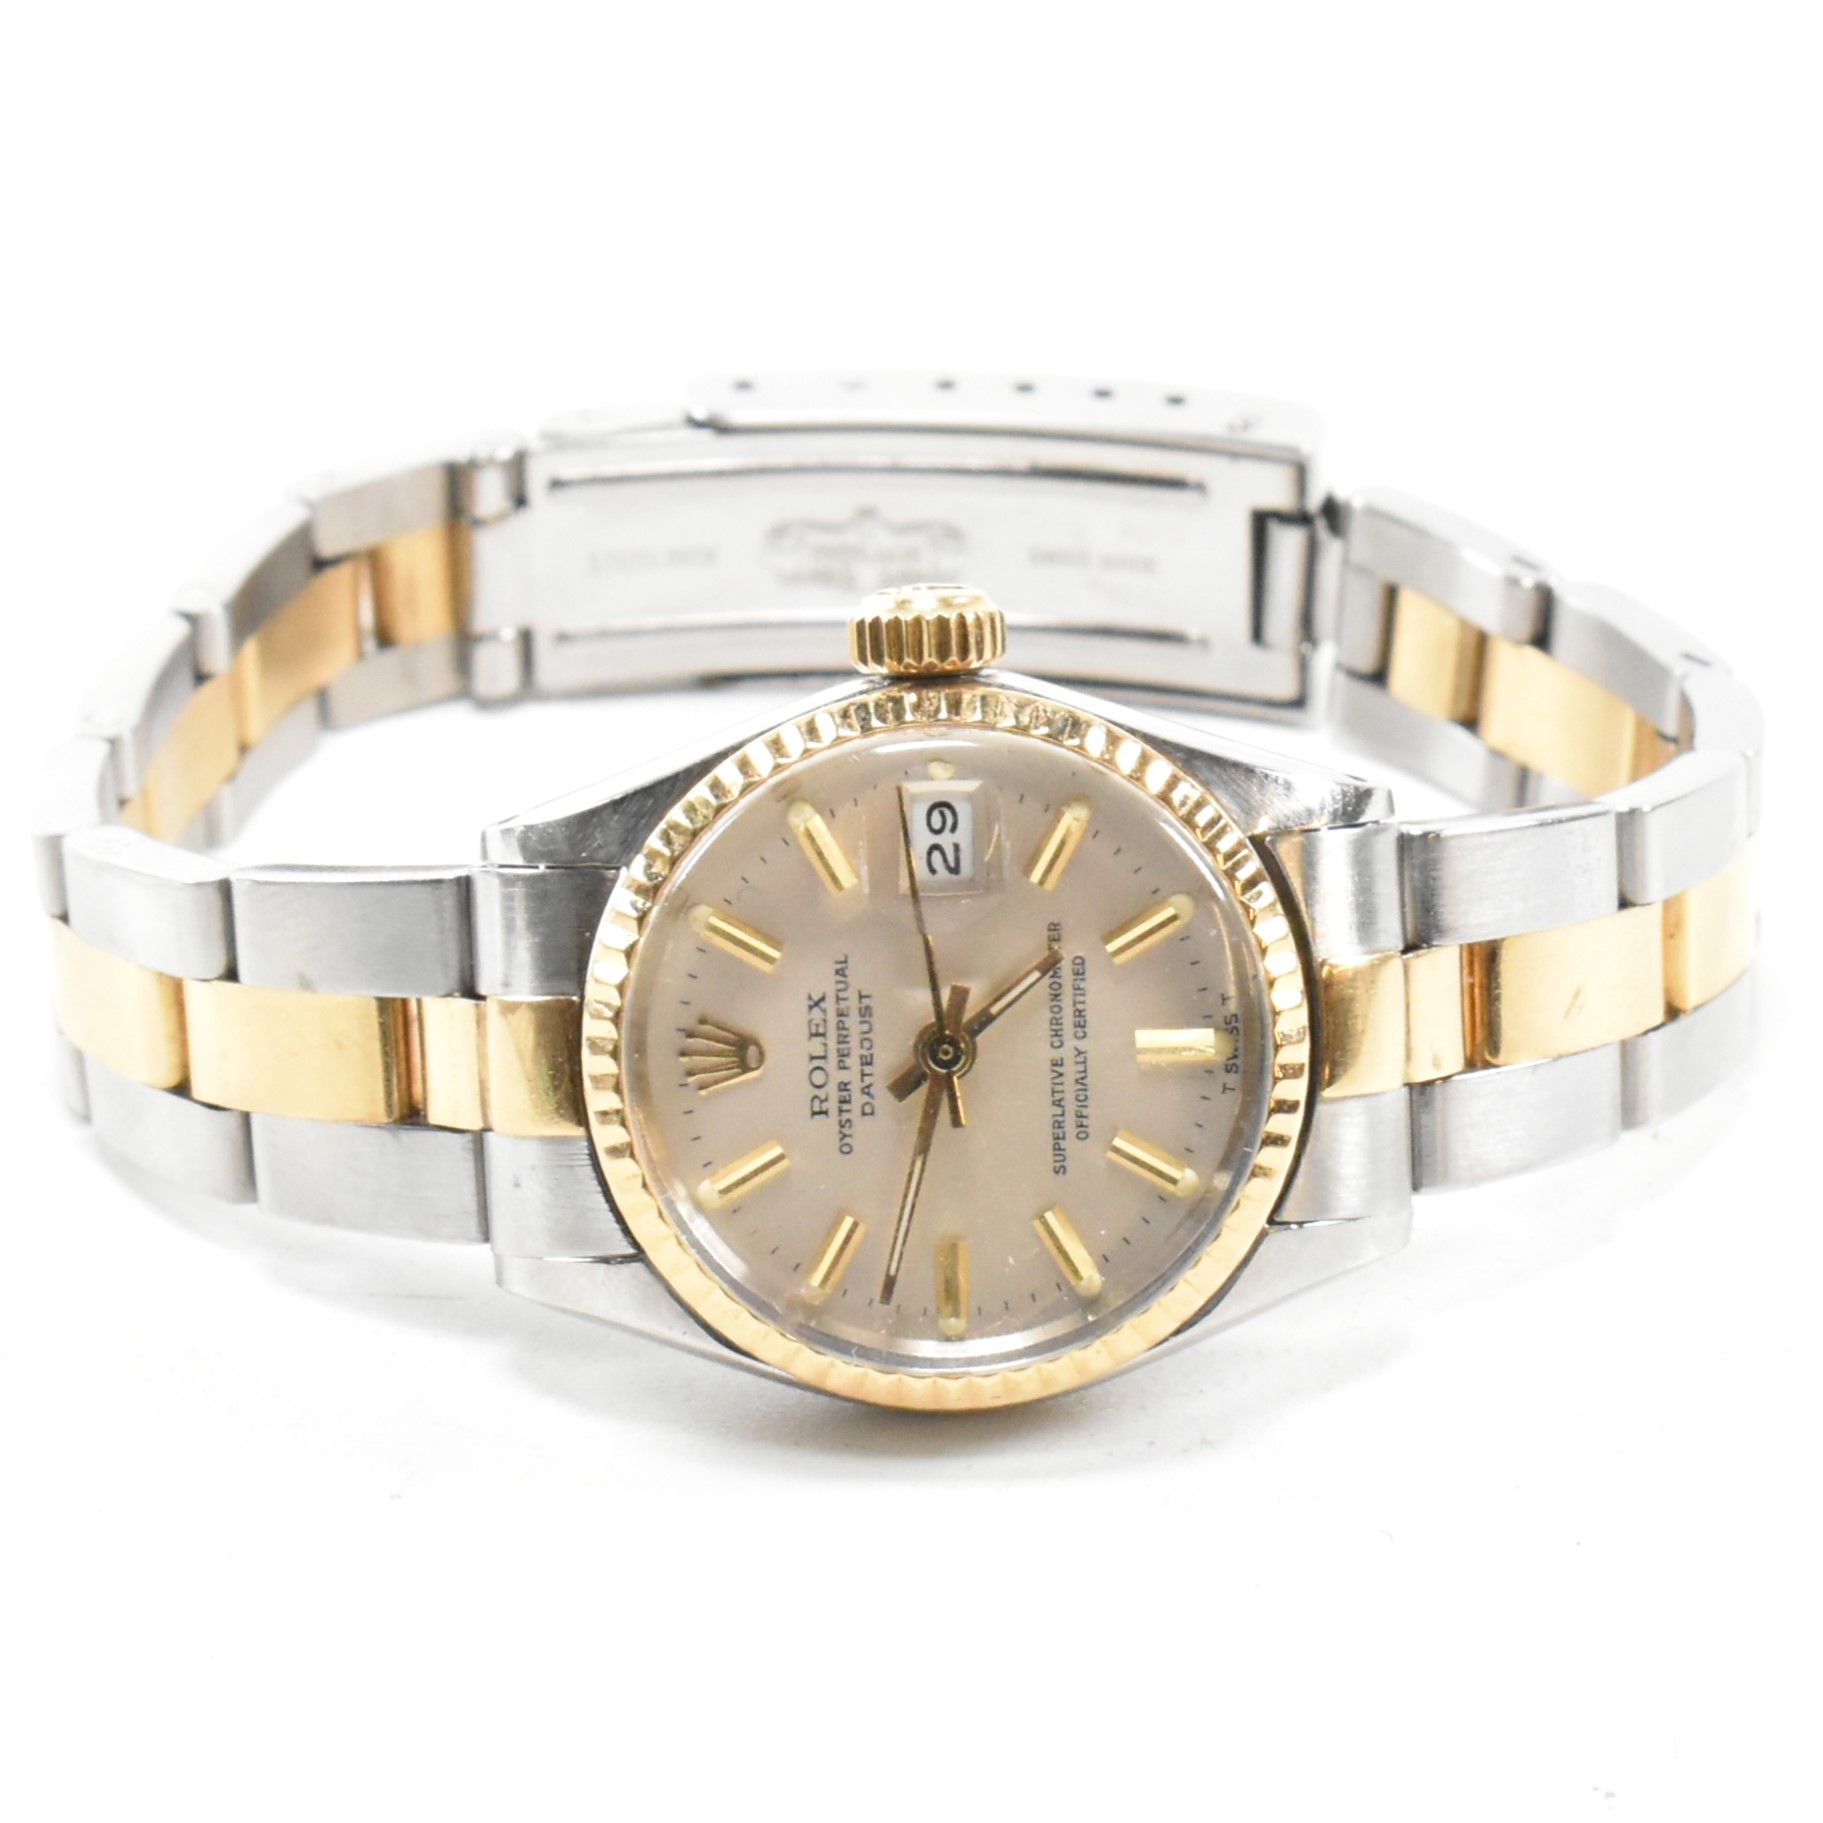 ROLEX OYSTER PERPETUAL DATEJUST LADIES CHRONOMETER - Image 5 of 5